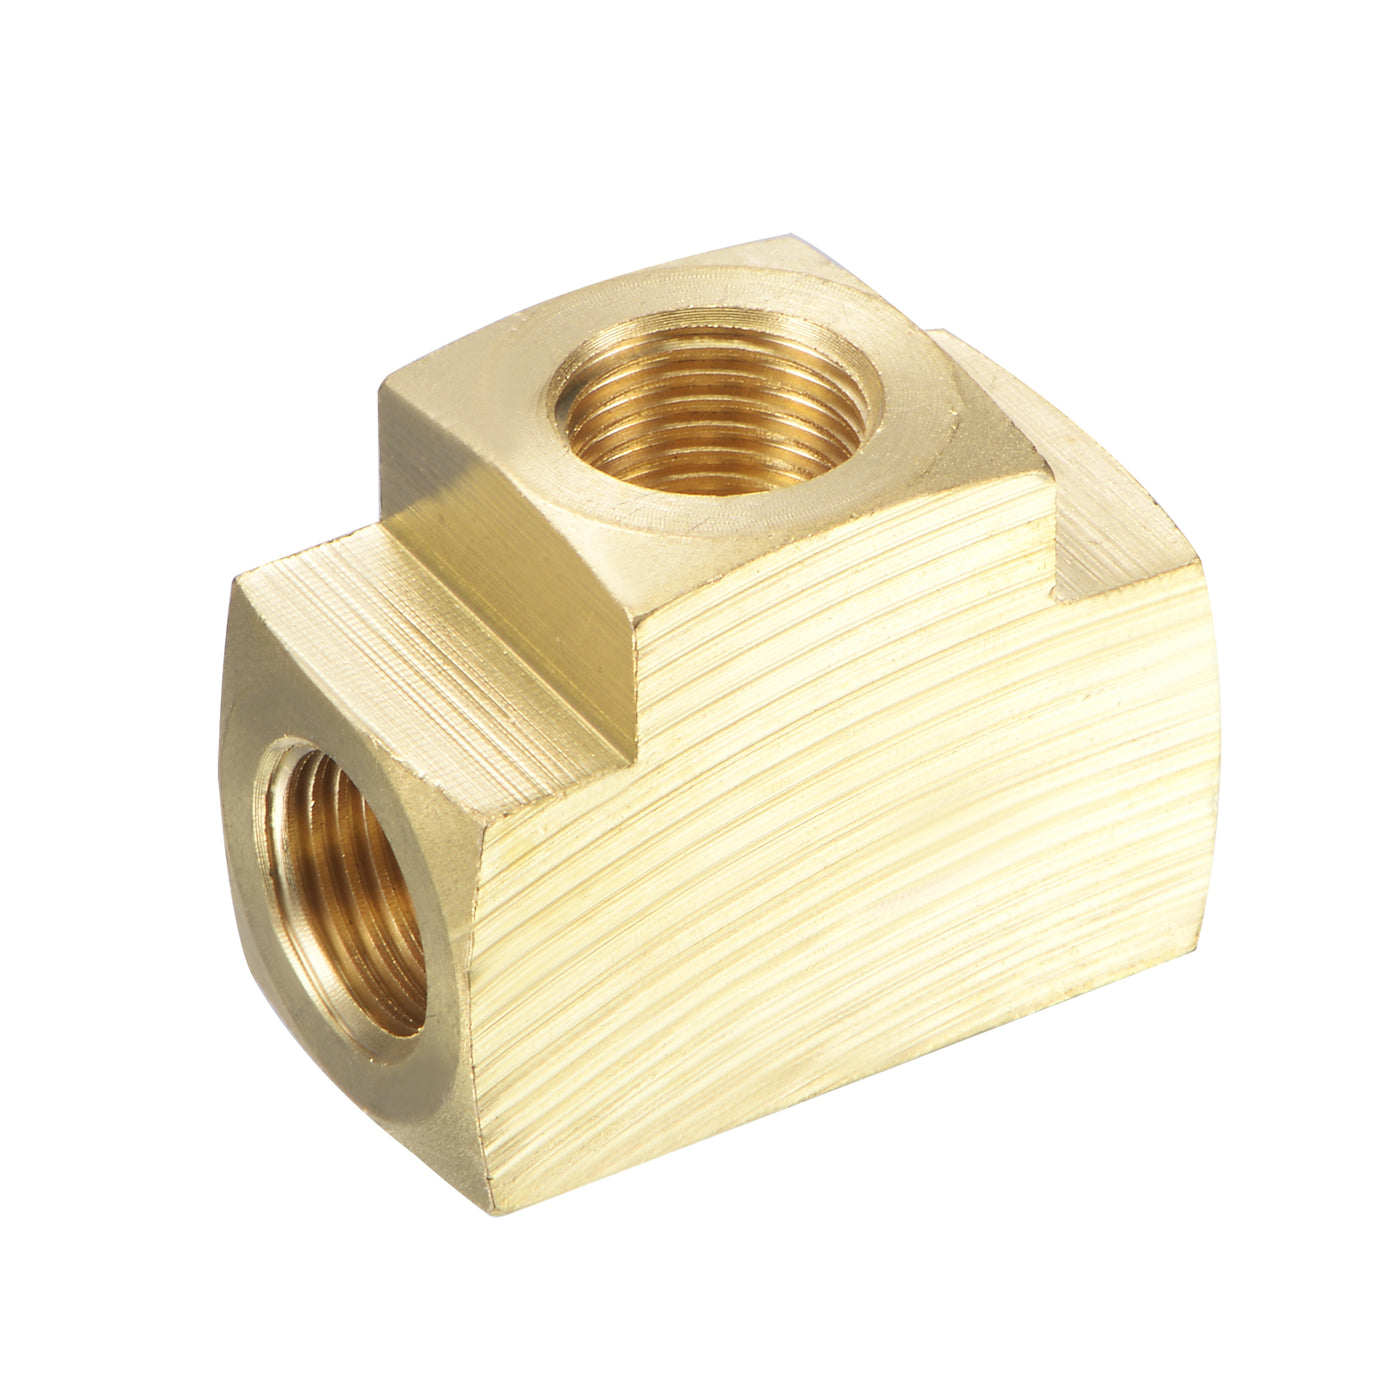 Uxcell Uxcell Brass Hose Fitting Tee 1/2 NPT Female Thread 3 Way Pipe Connector Adapter